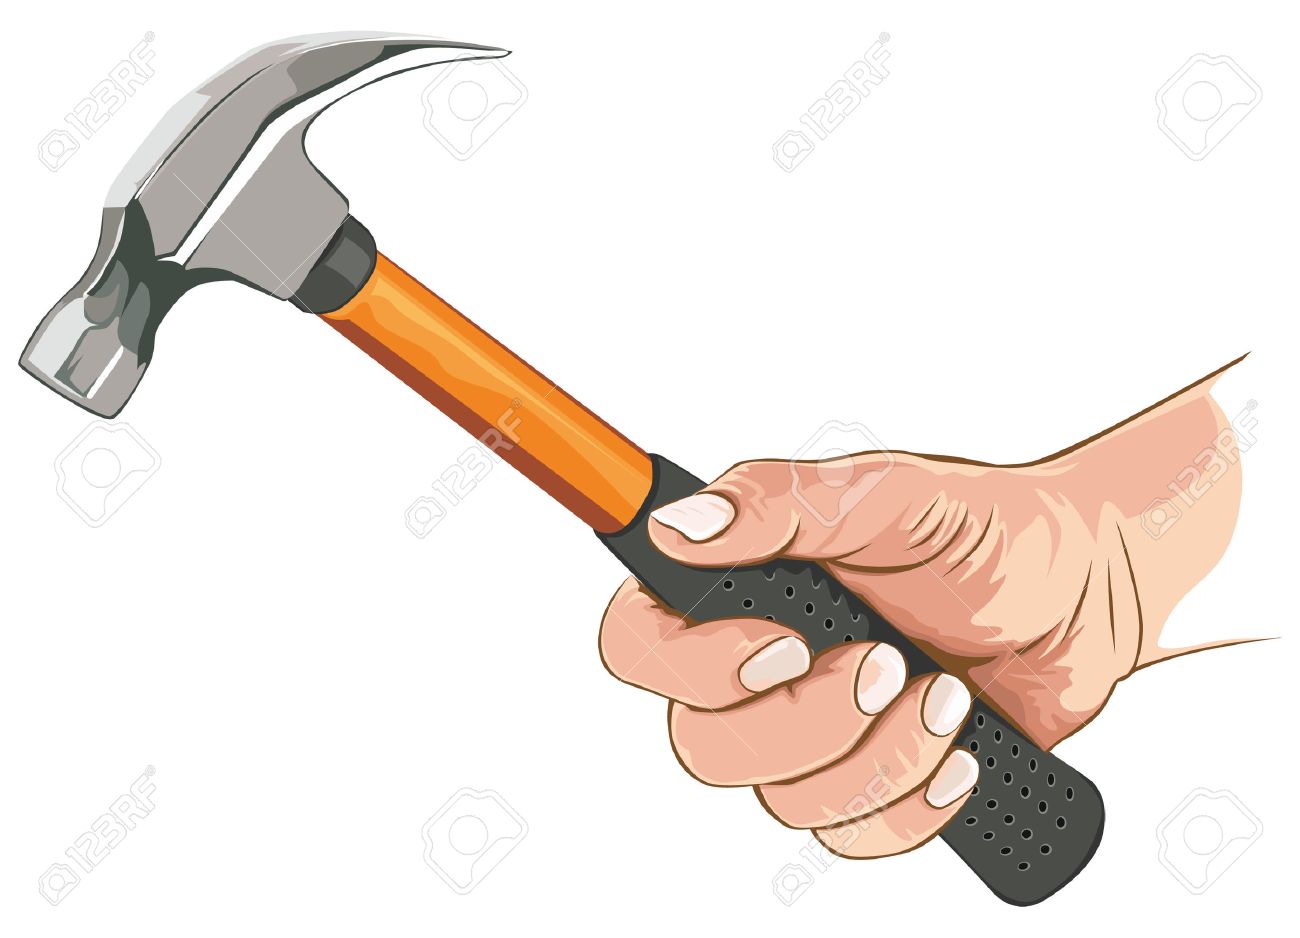 hammer clipart claw